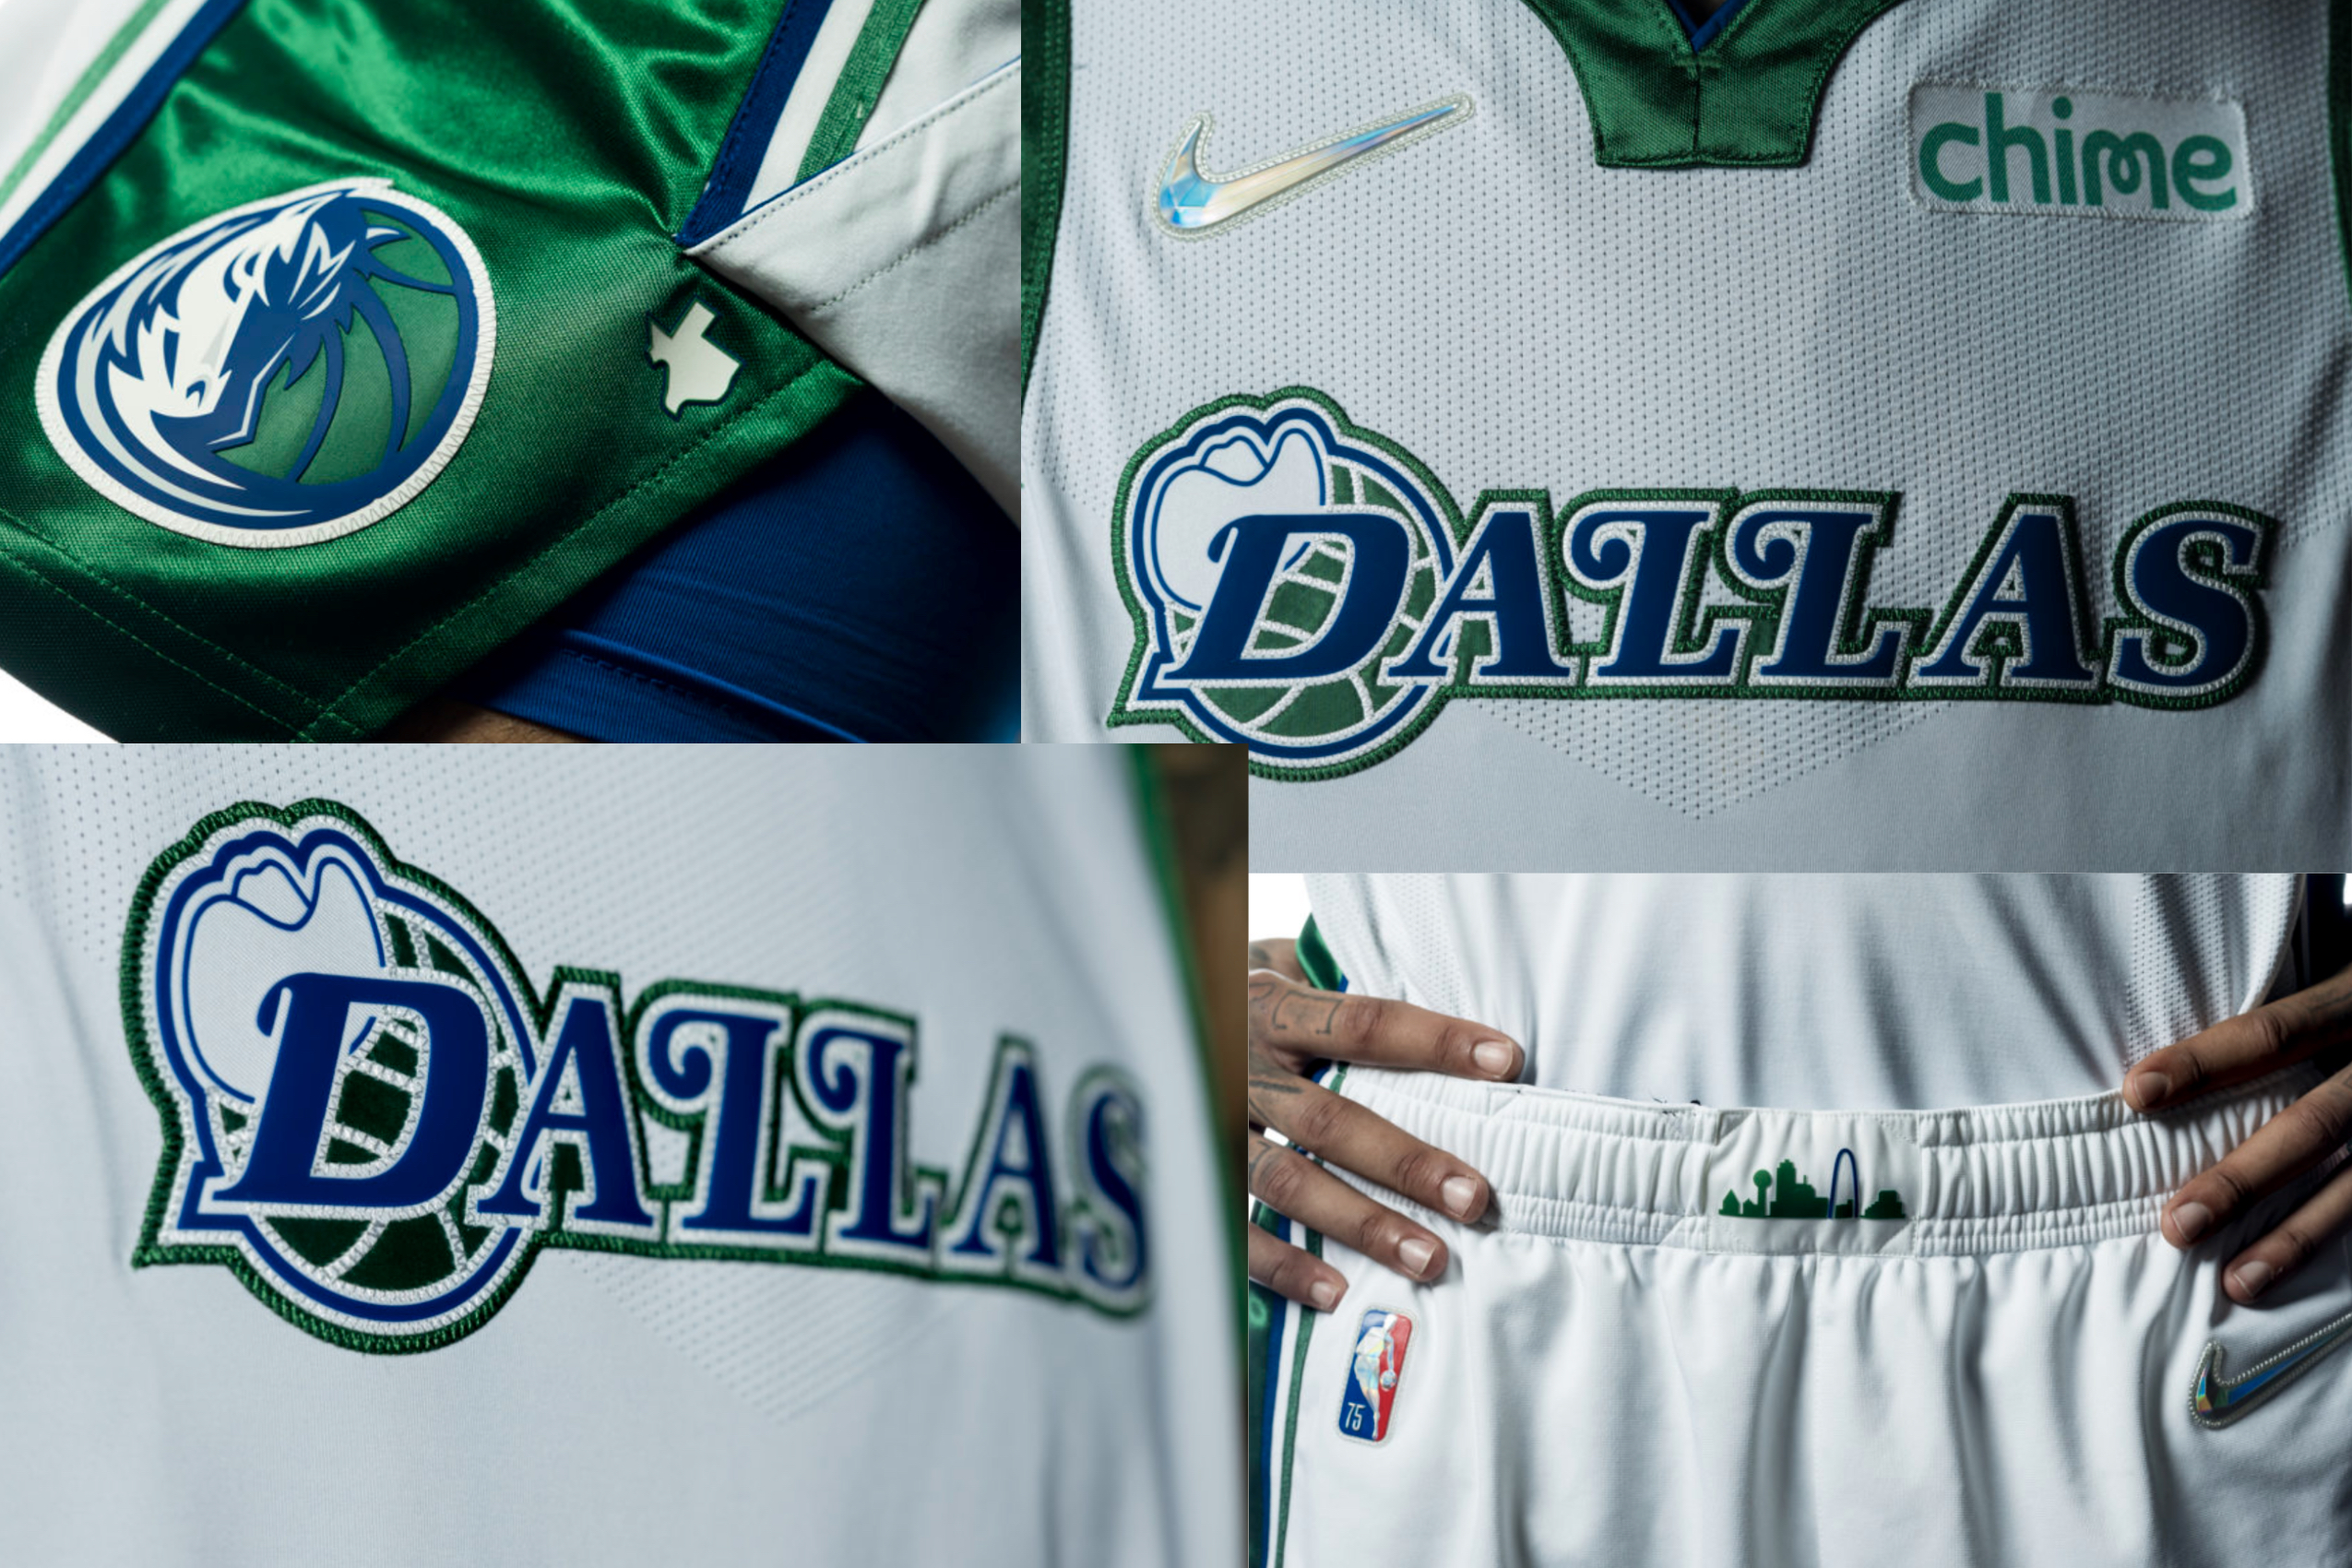 Jazz Relaunch Brand With New Uniforms, Courts, And Merchandise